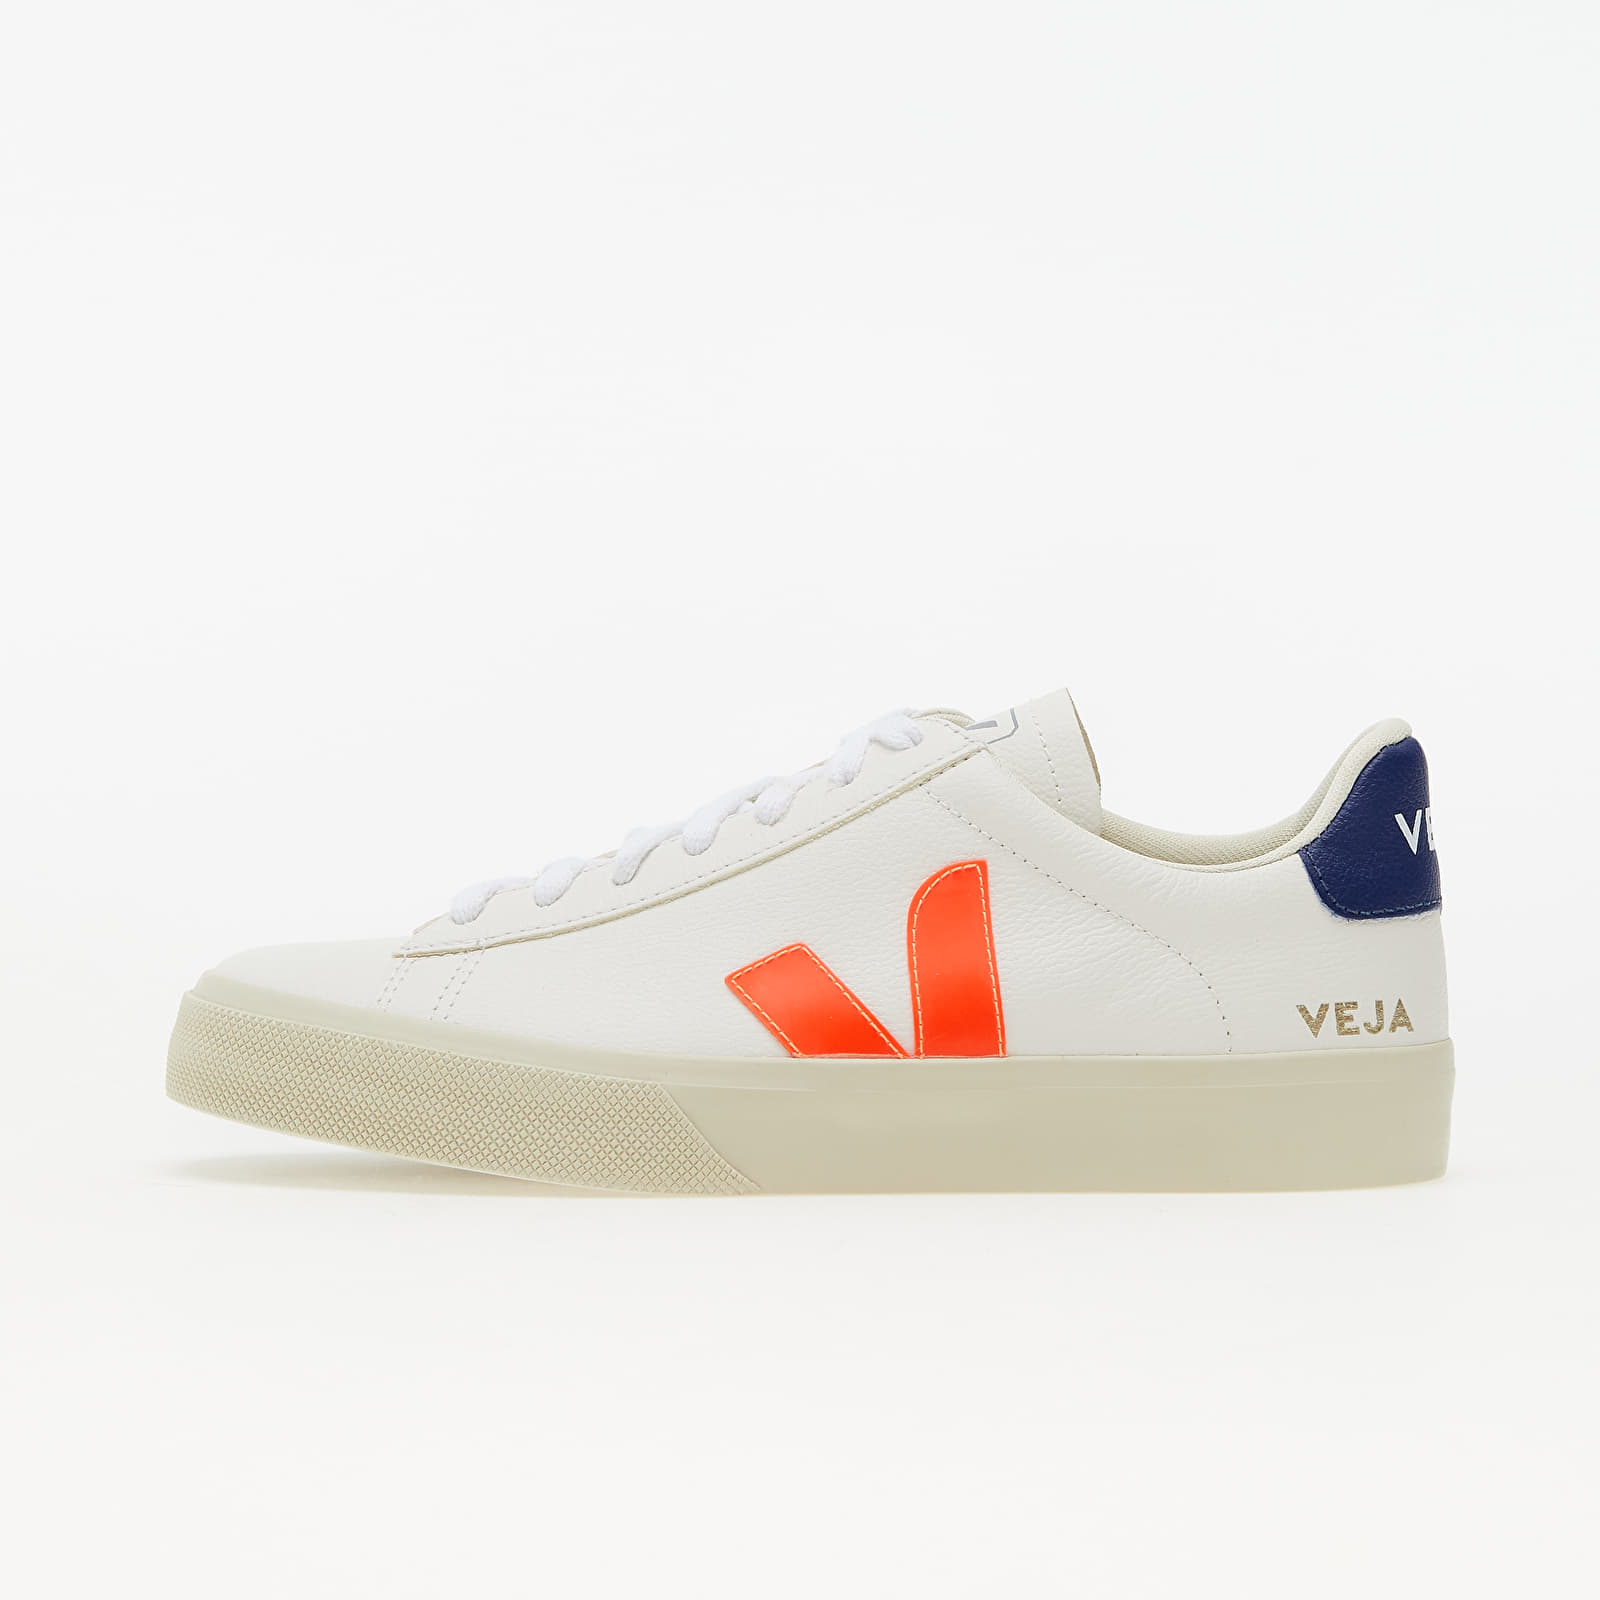 Chaussures et baskets femme Veja W Campo Chromefree Open White